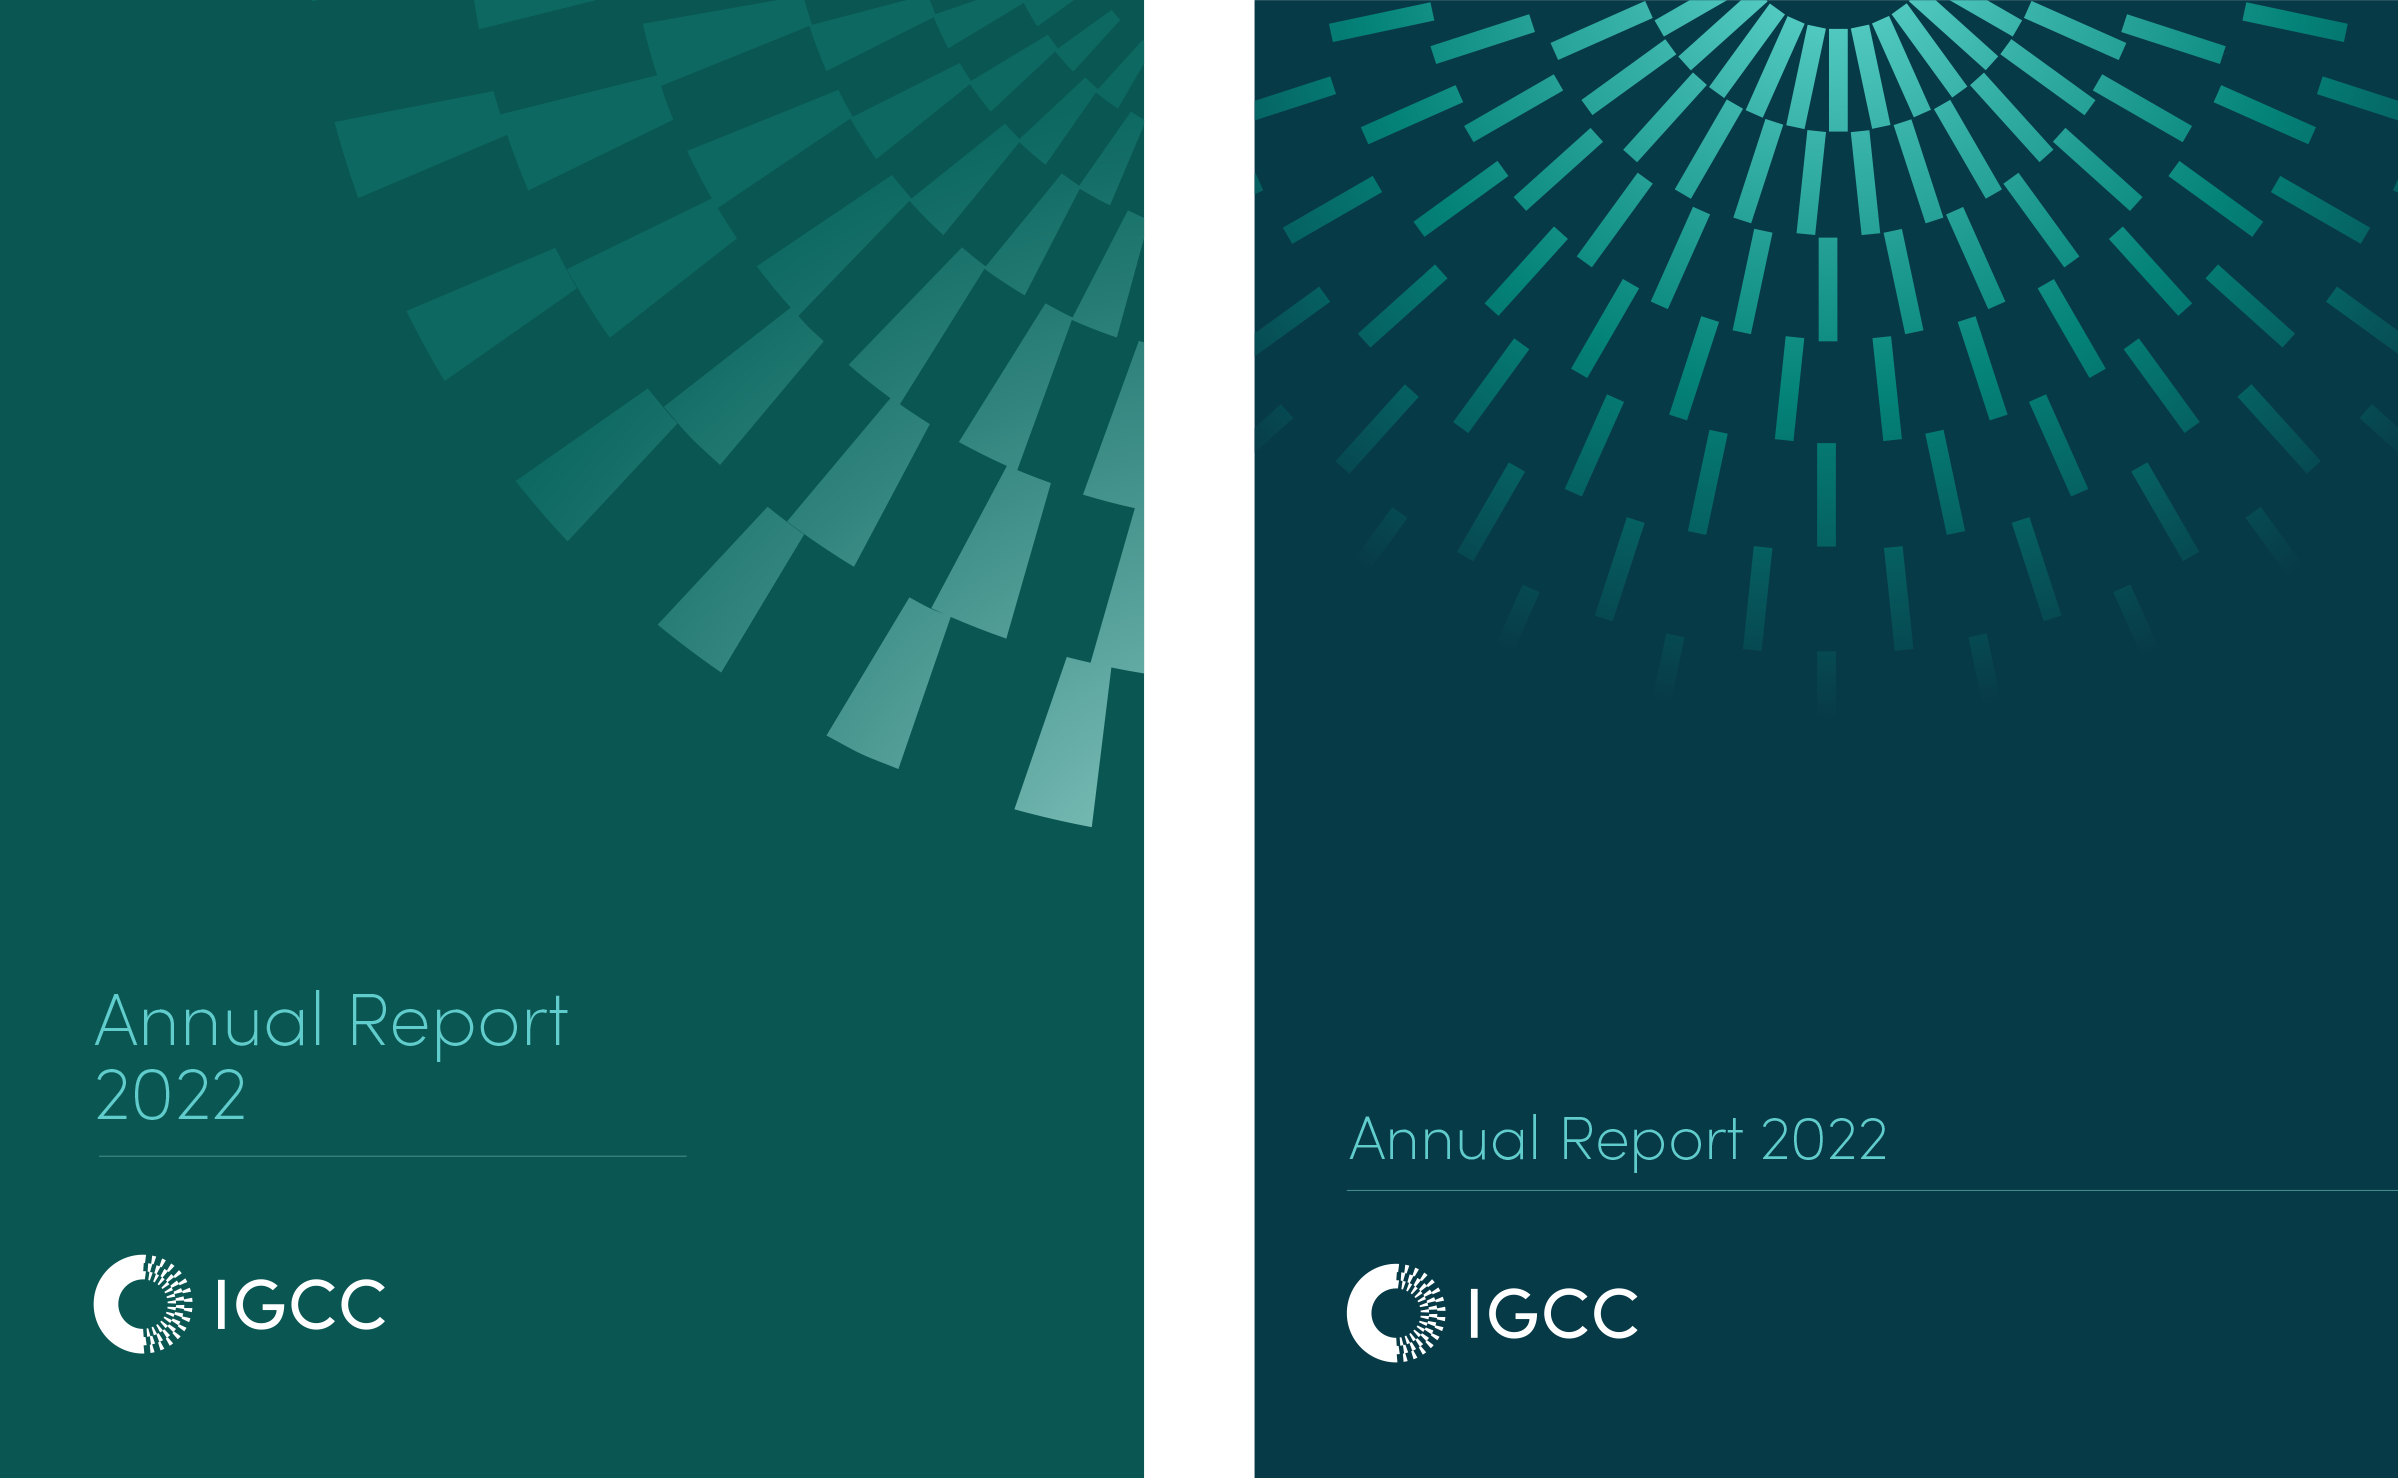 2 annual report cover designs using rays from logo as a graphic motif in greens and teals